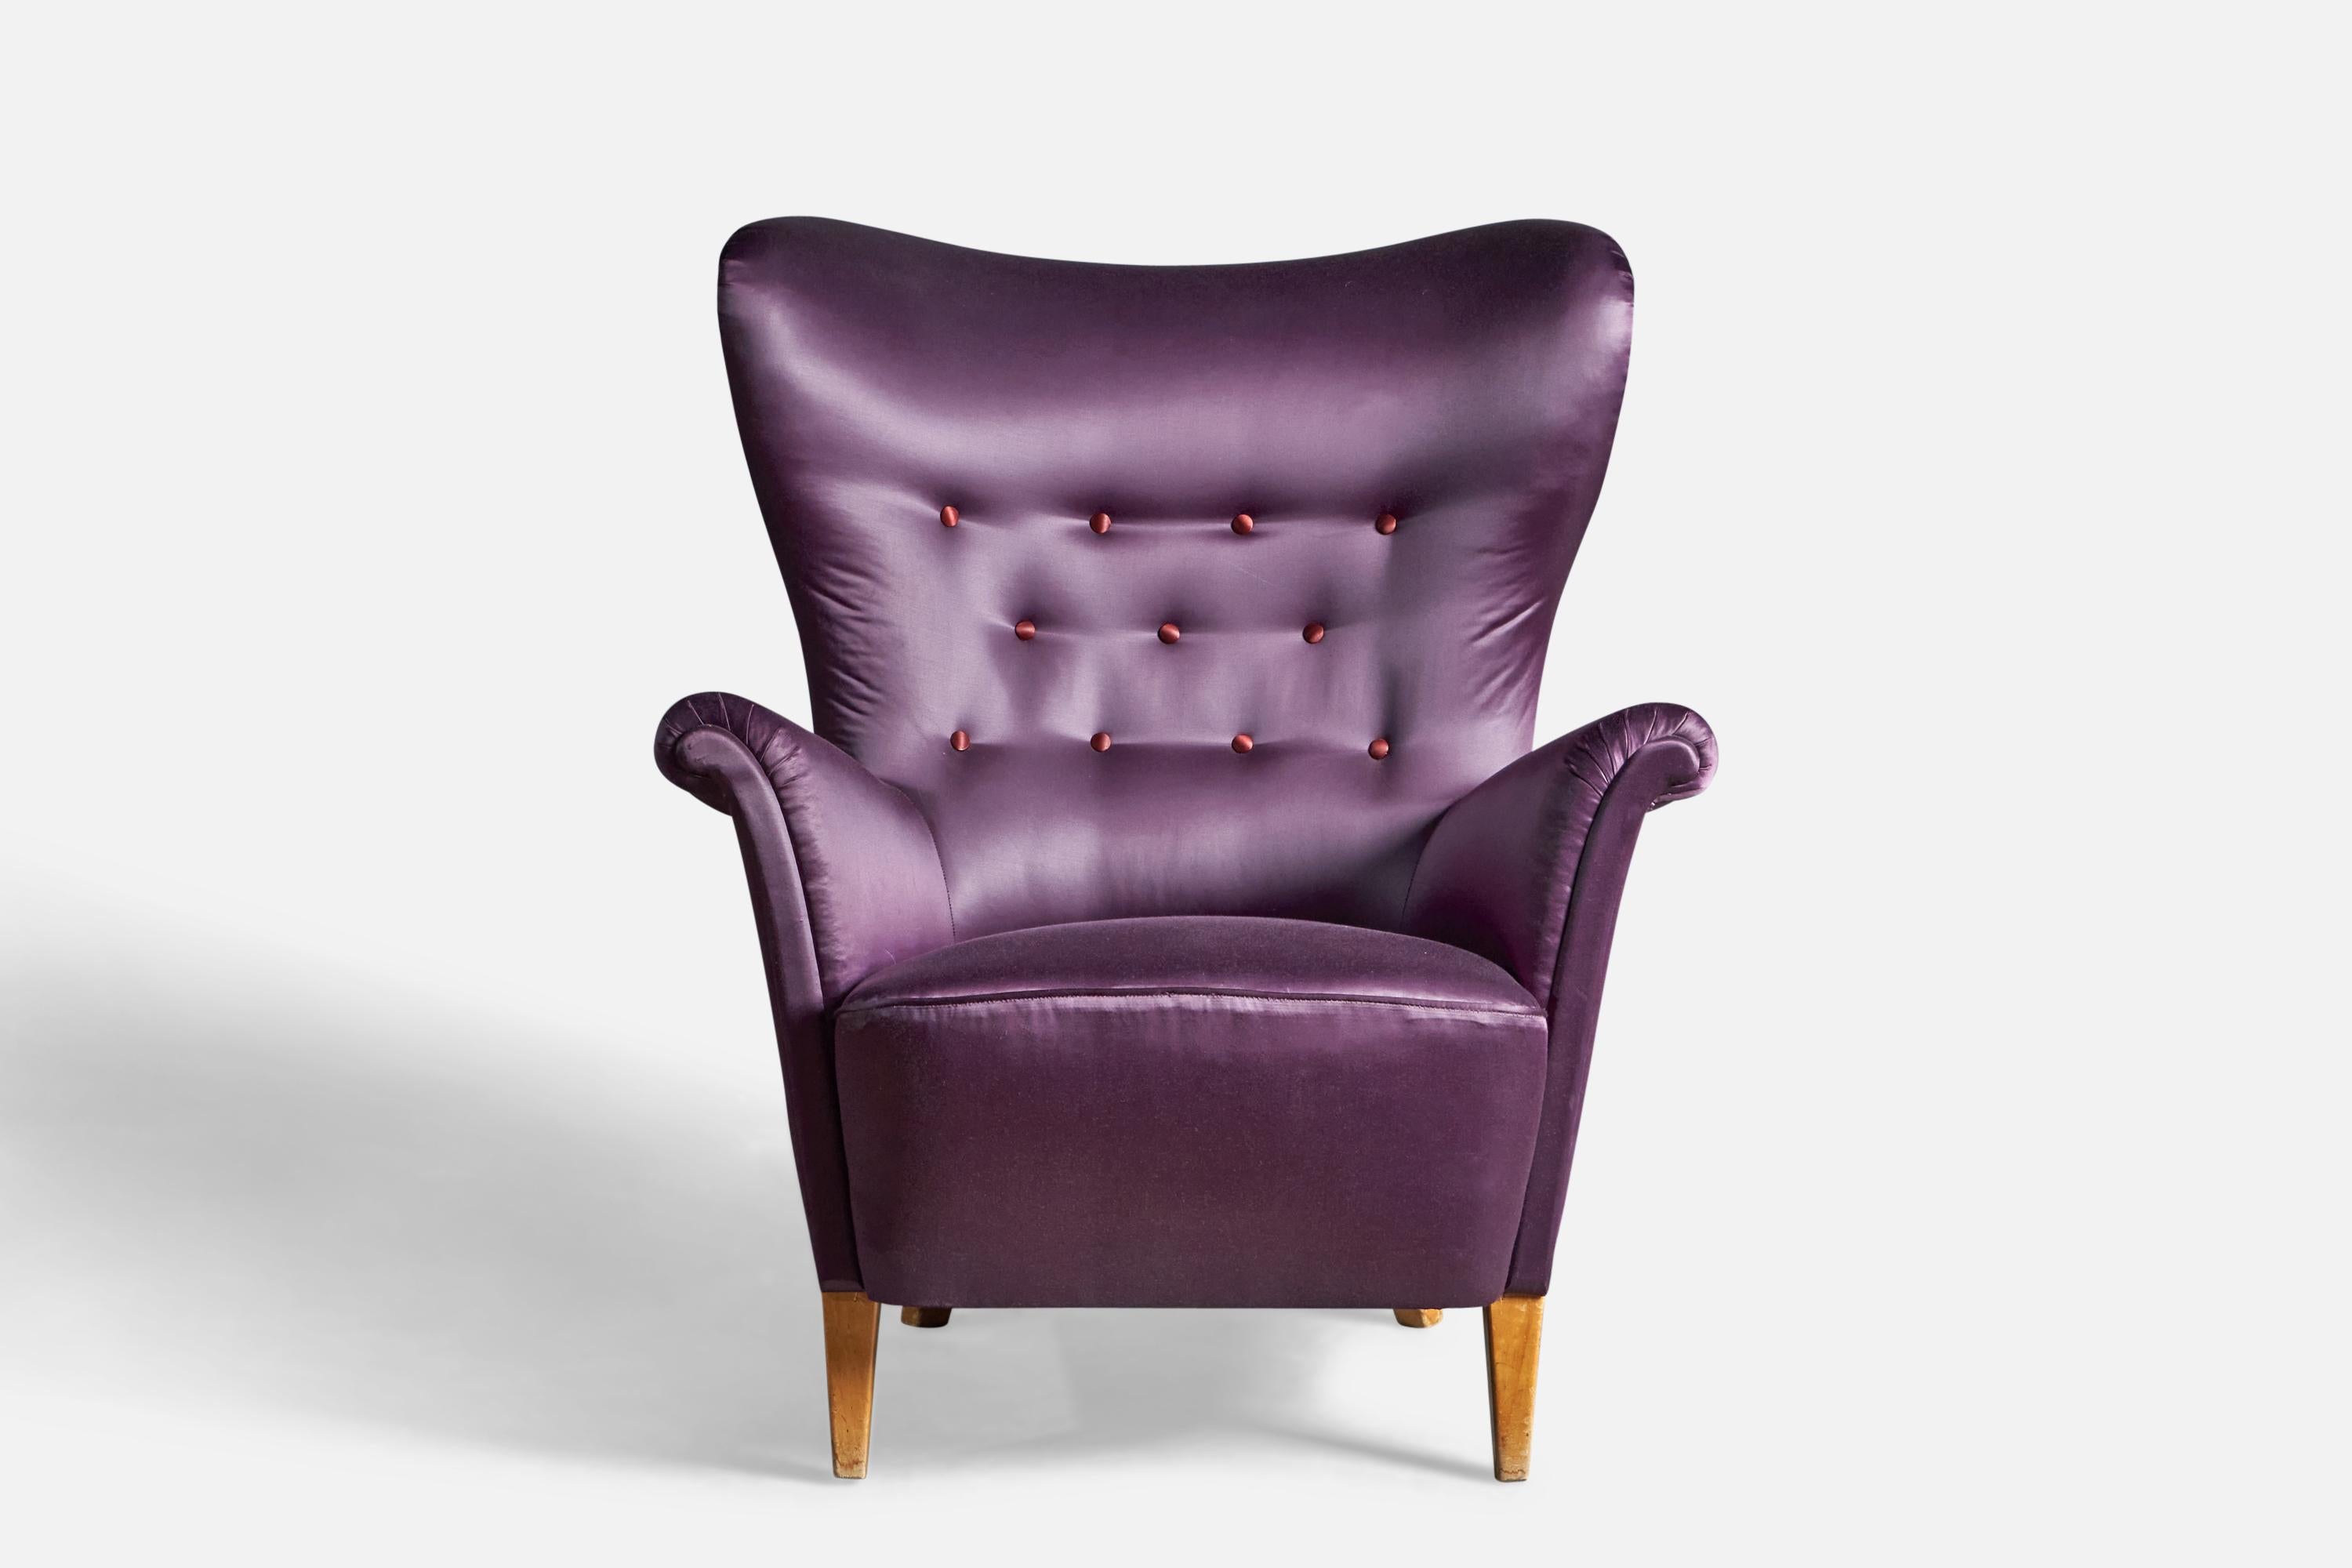 A purple velvet and light birch lounge chair, designed and produced by Carl Malmsten, Sweden, c. 1940s.
